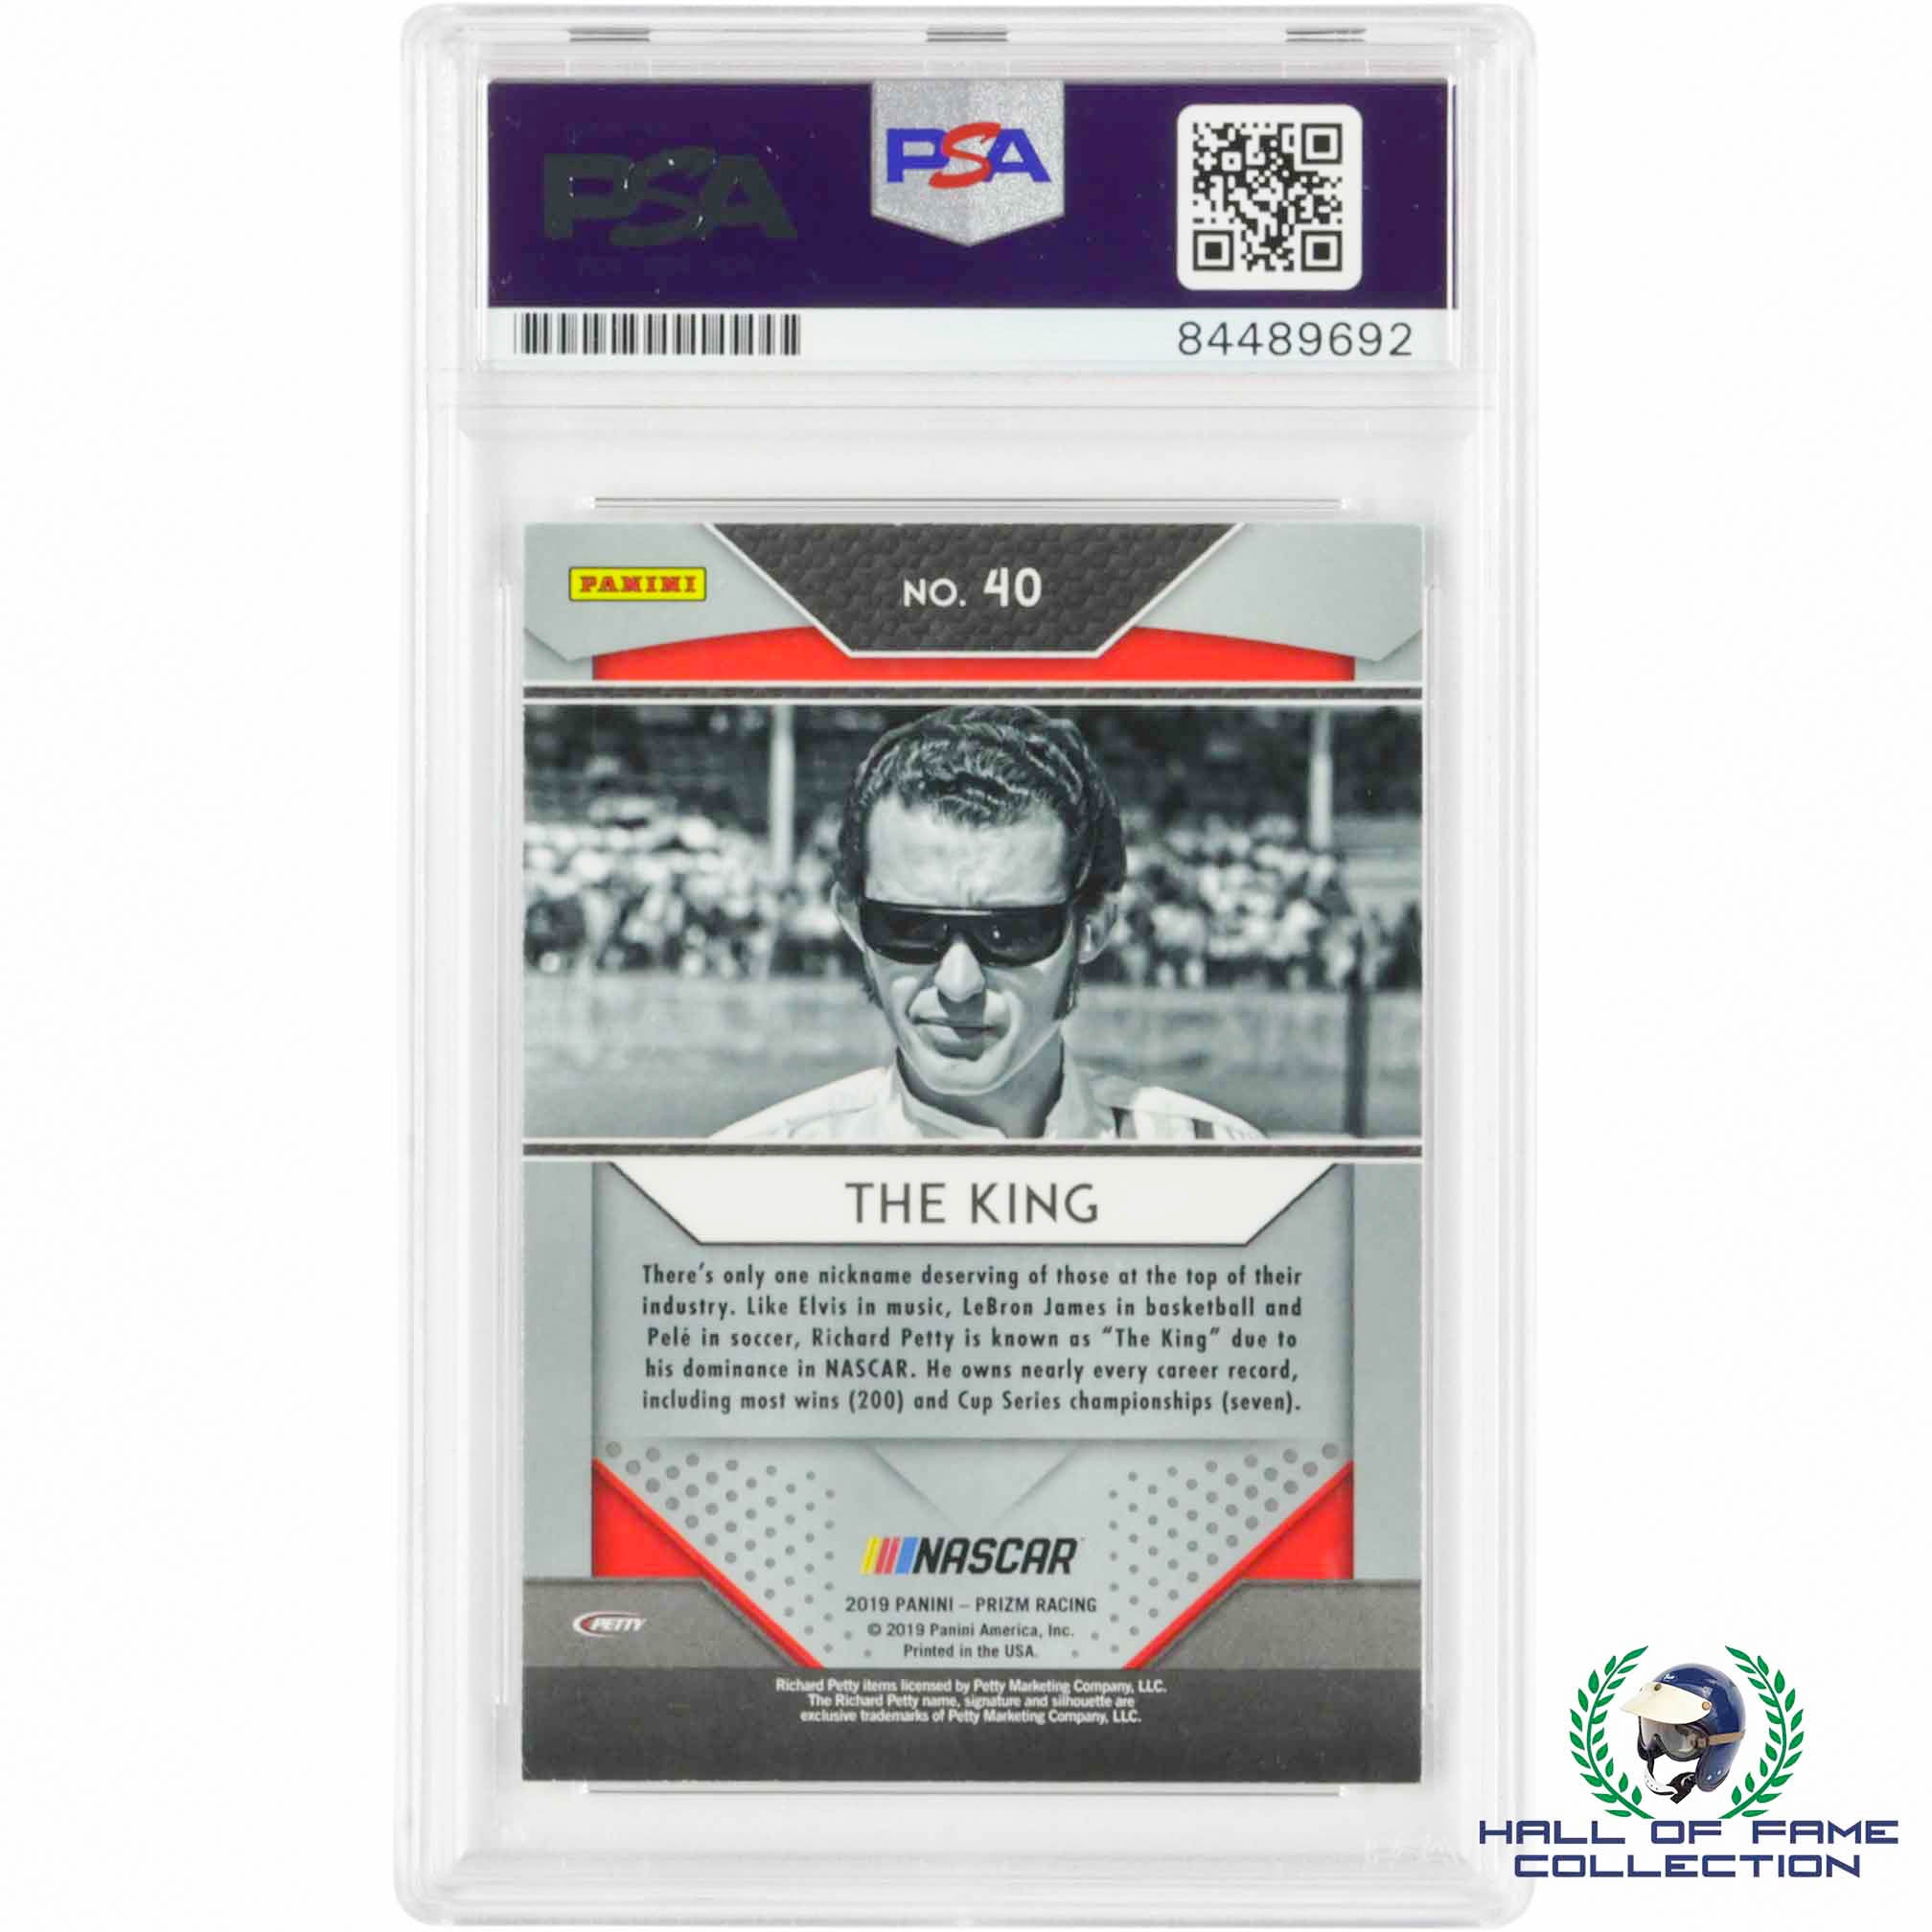 Prizm The King Richard Petty Autographed PSA/DNA Certified 84489692